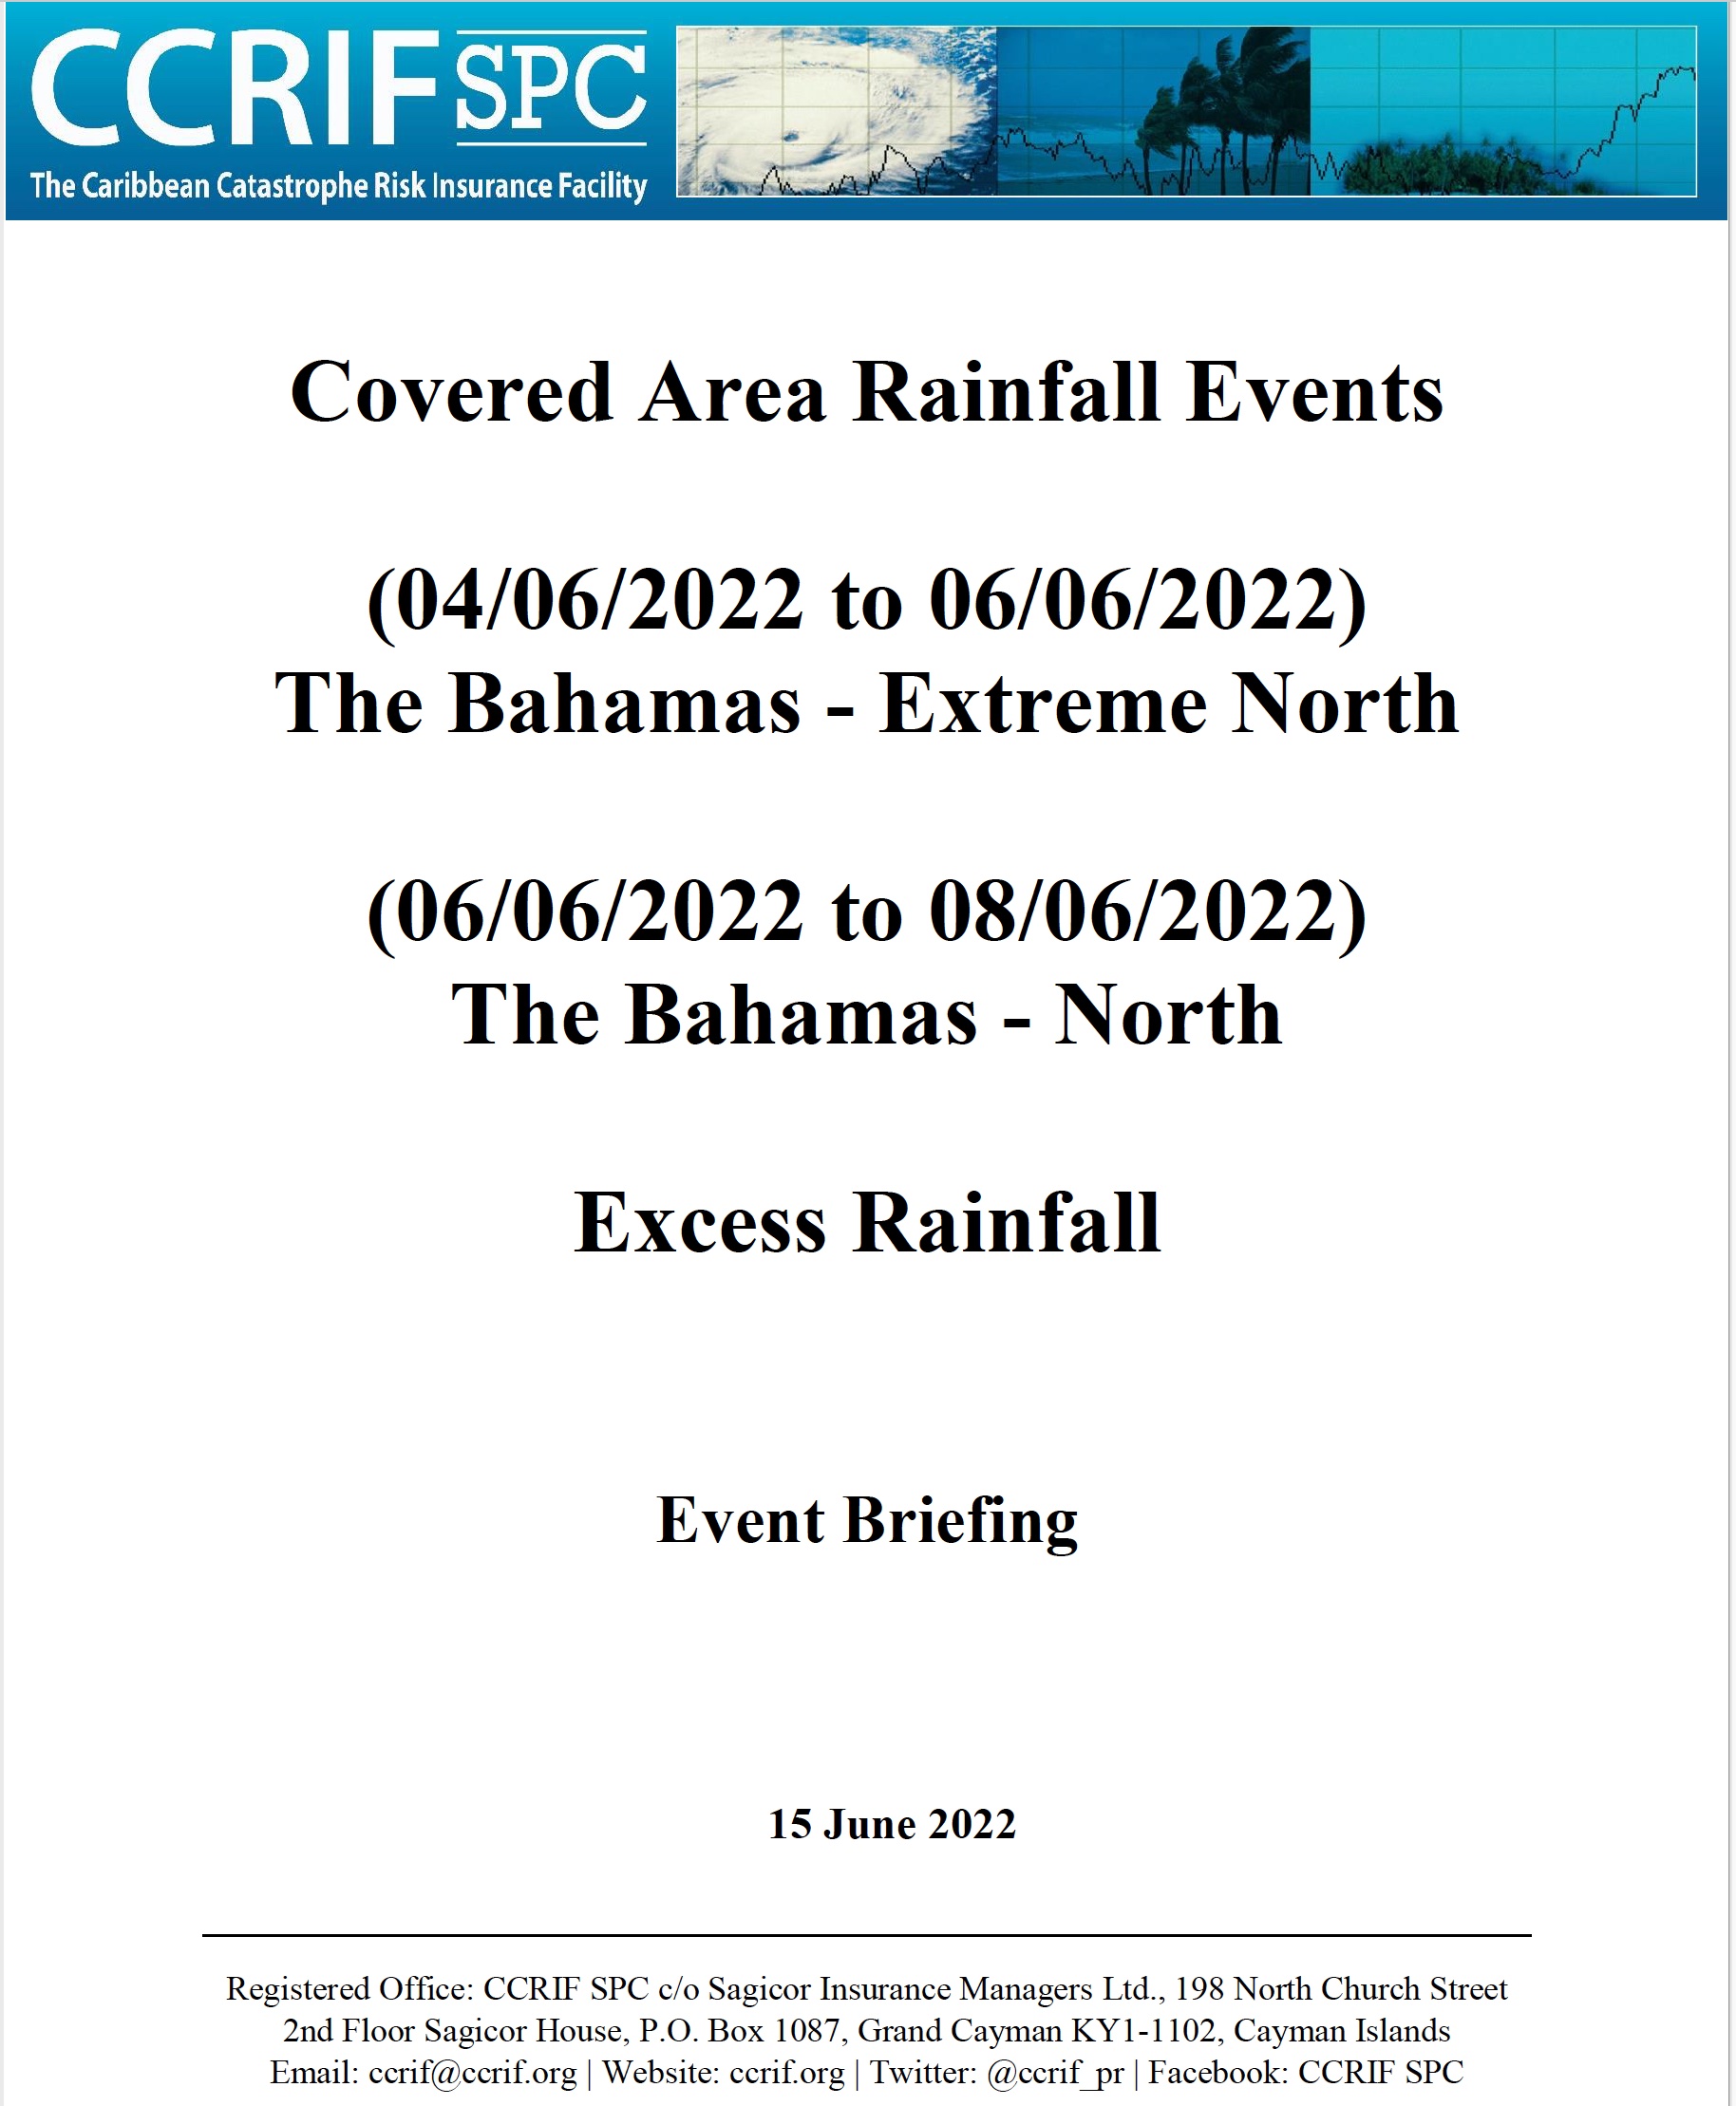 Event Briefing - Excess Rainfall - Covered Area Rainfall Events - The Bahamas - June 15 2022